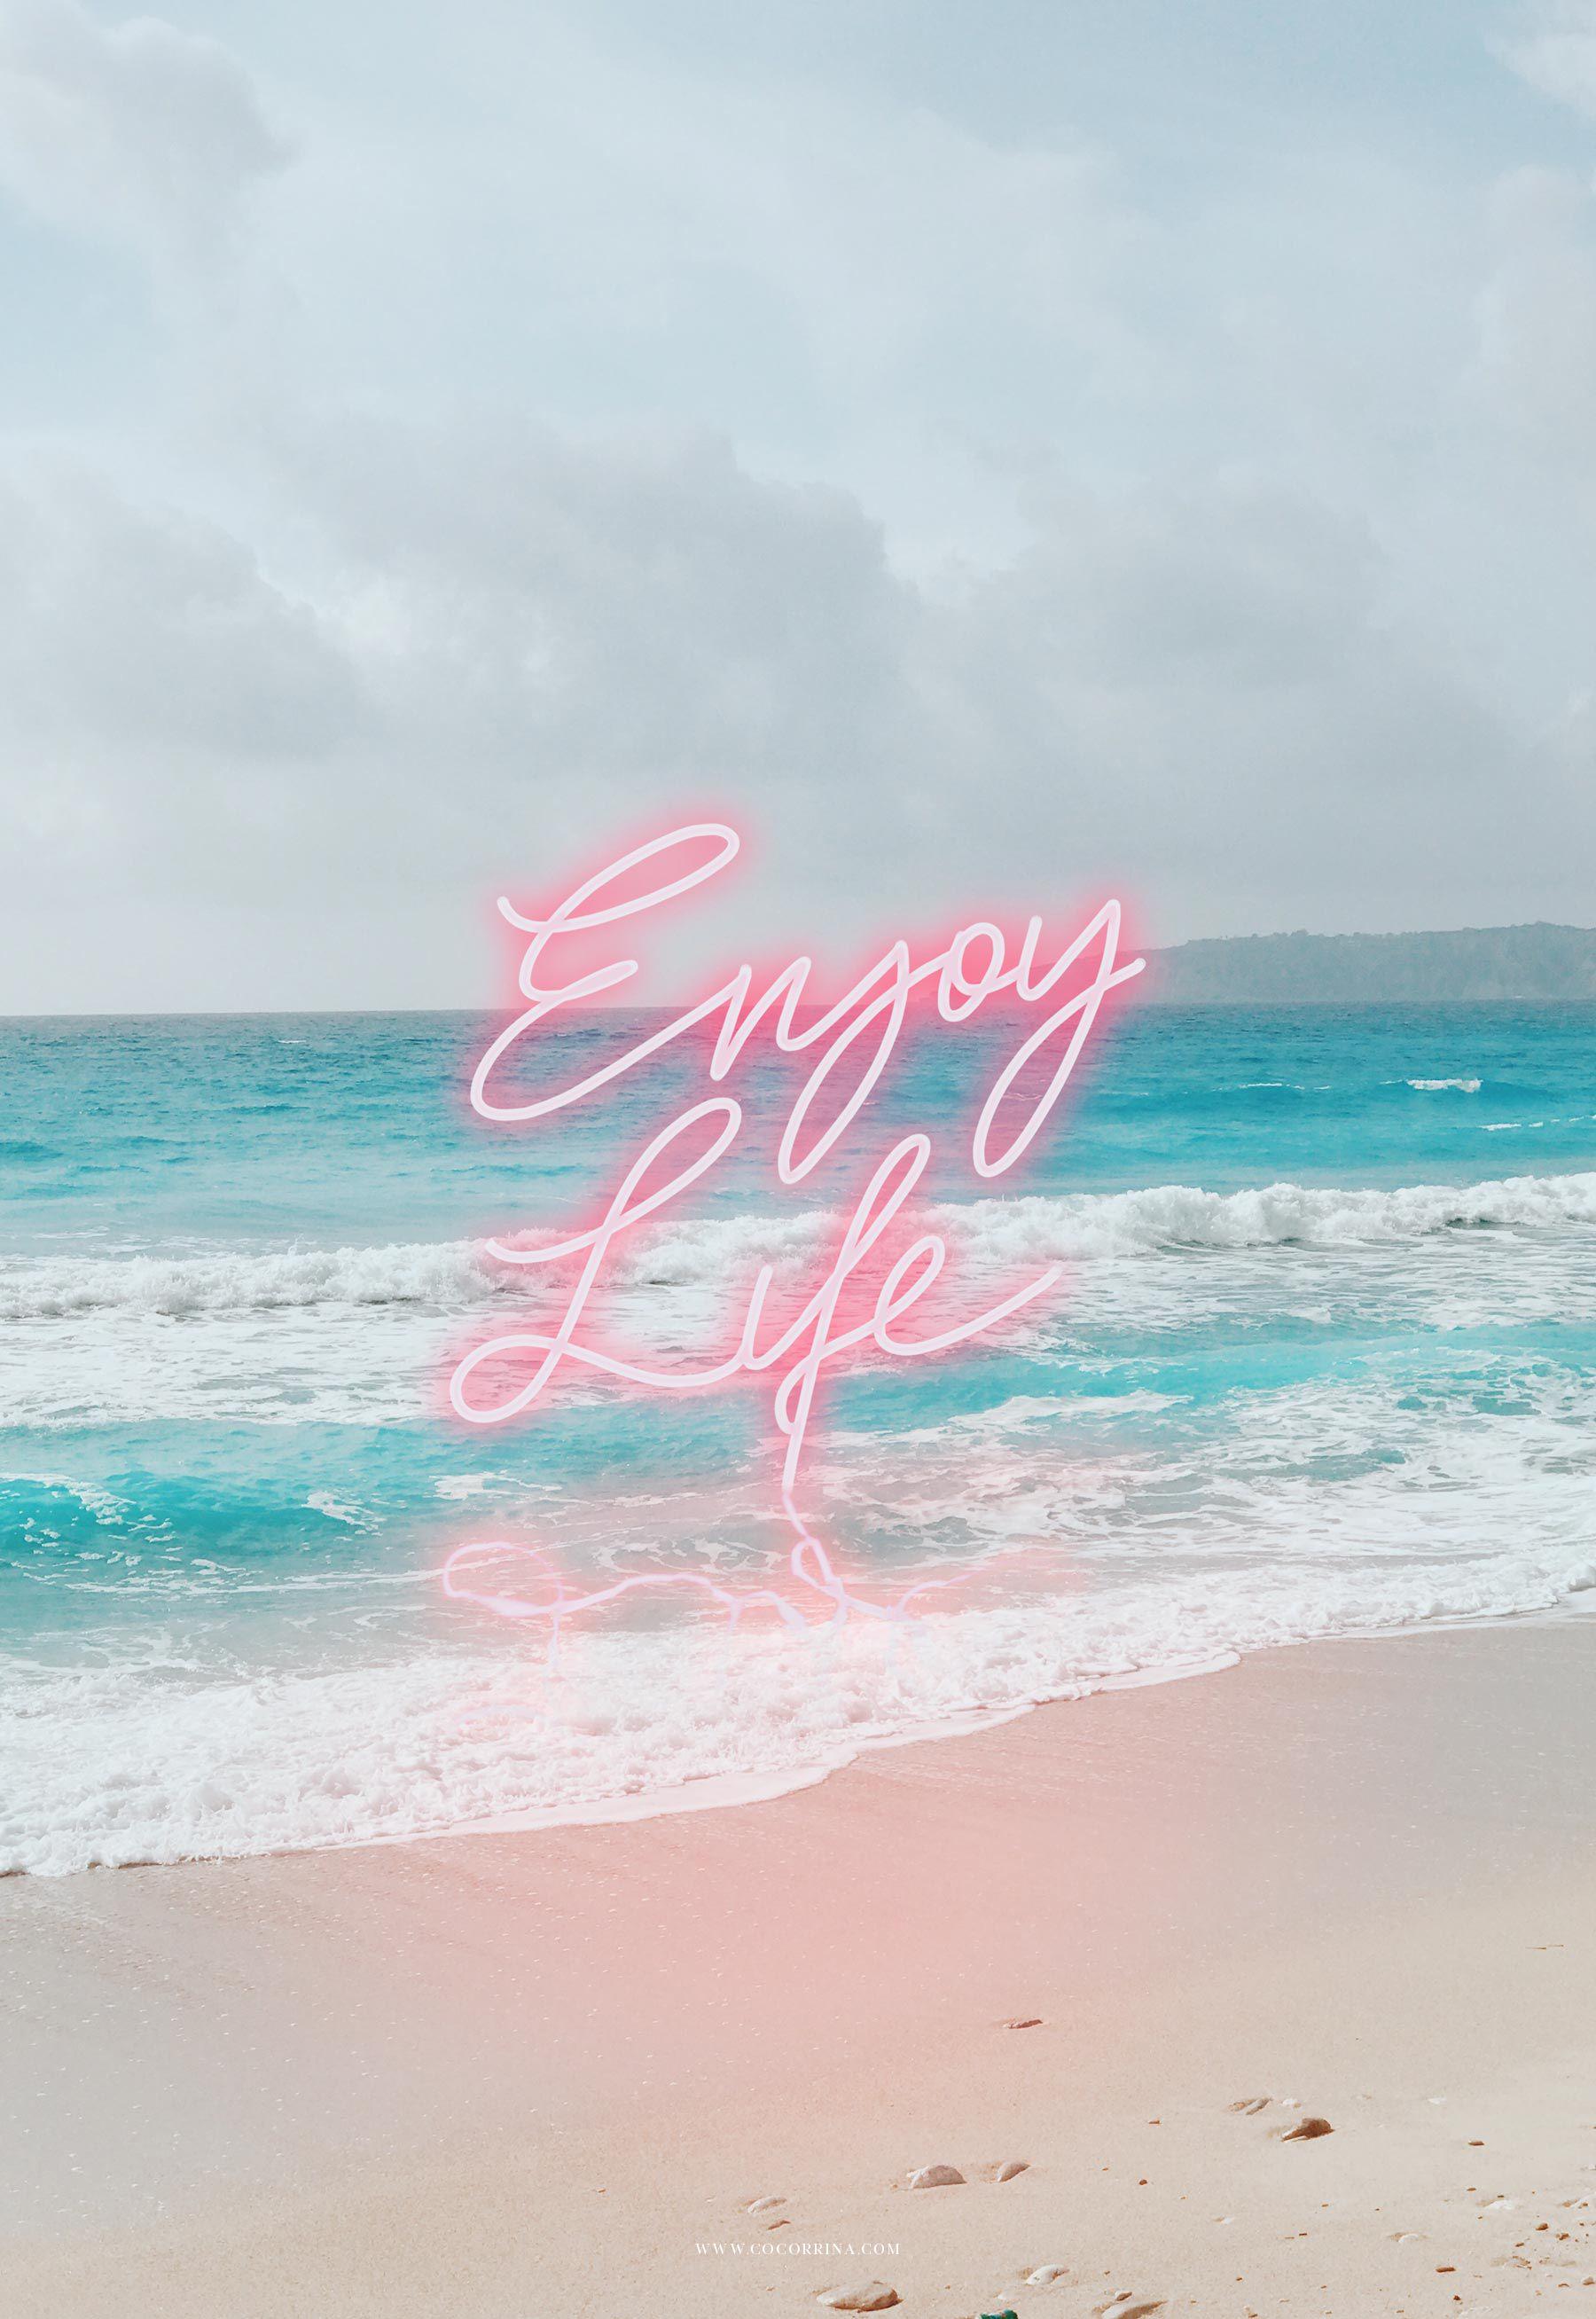  Beach  Quotes  Wallpapers Wallpaper Cave